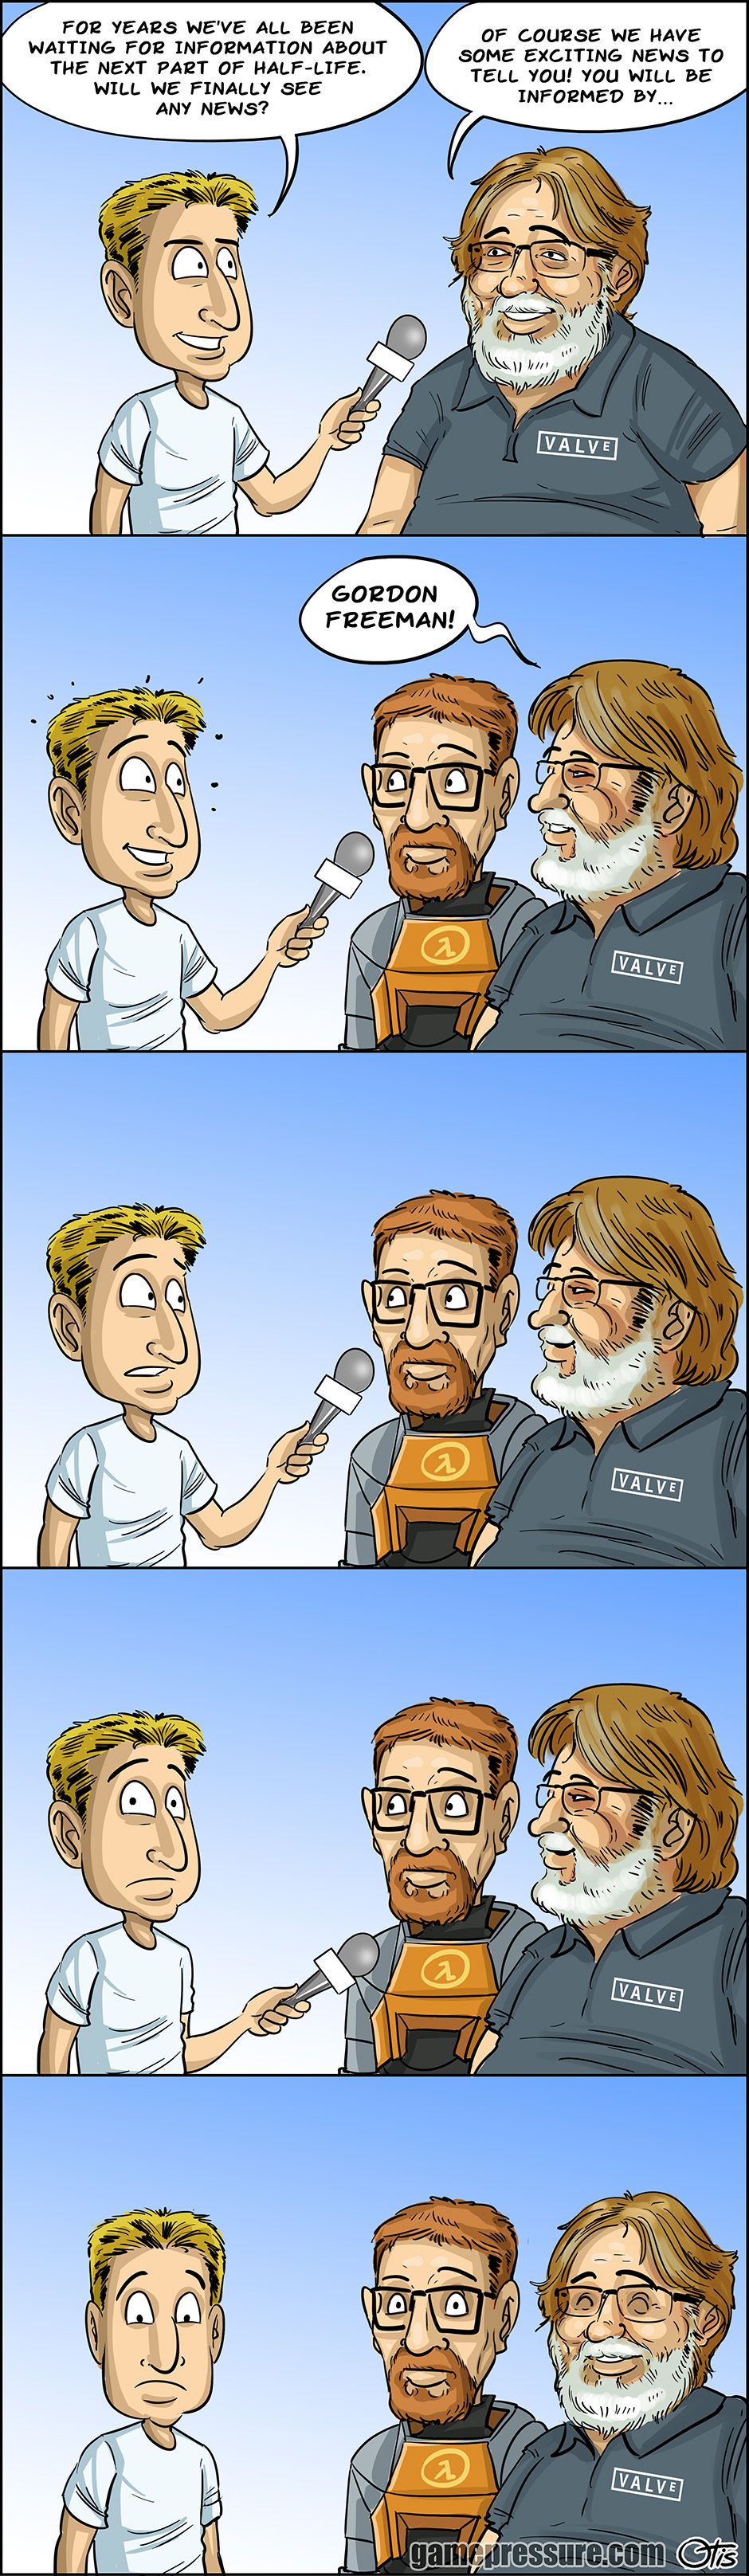 This is how GabeN delivers news about Half-Life 3, comics Cartoon Games, #214. The only person that knows something about Half-Life 3 is HIM.